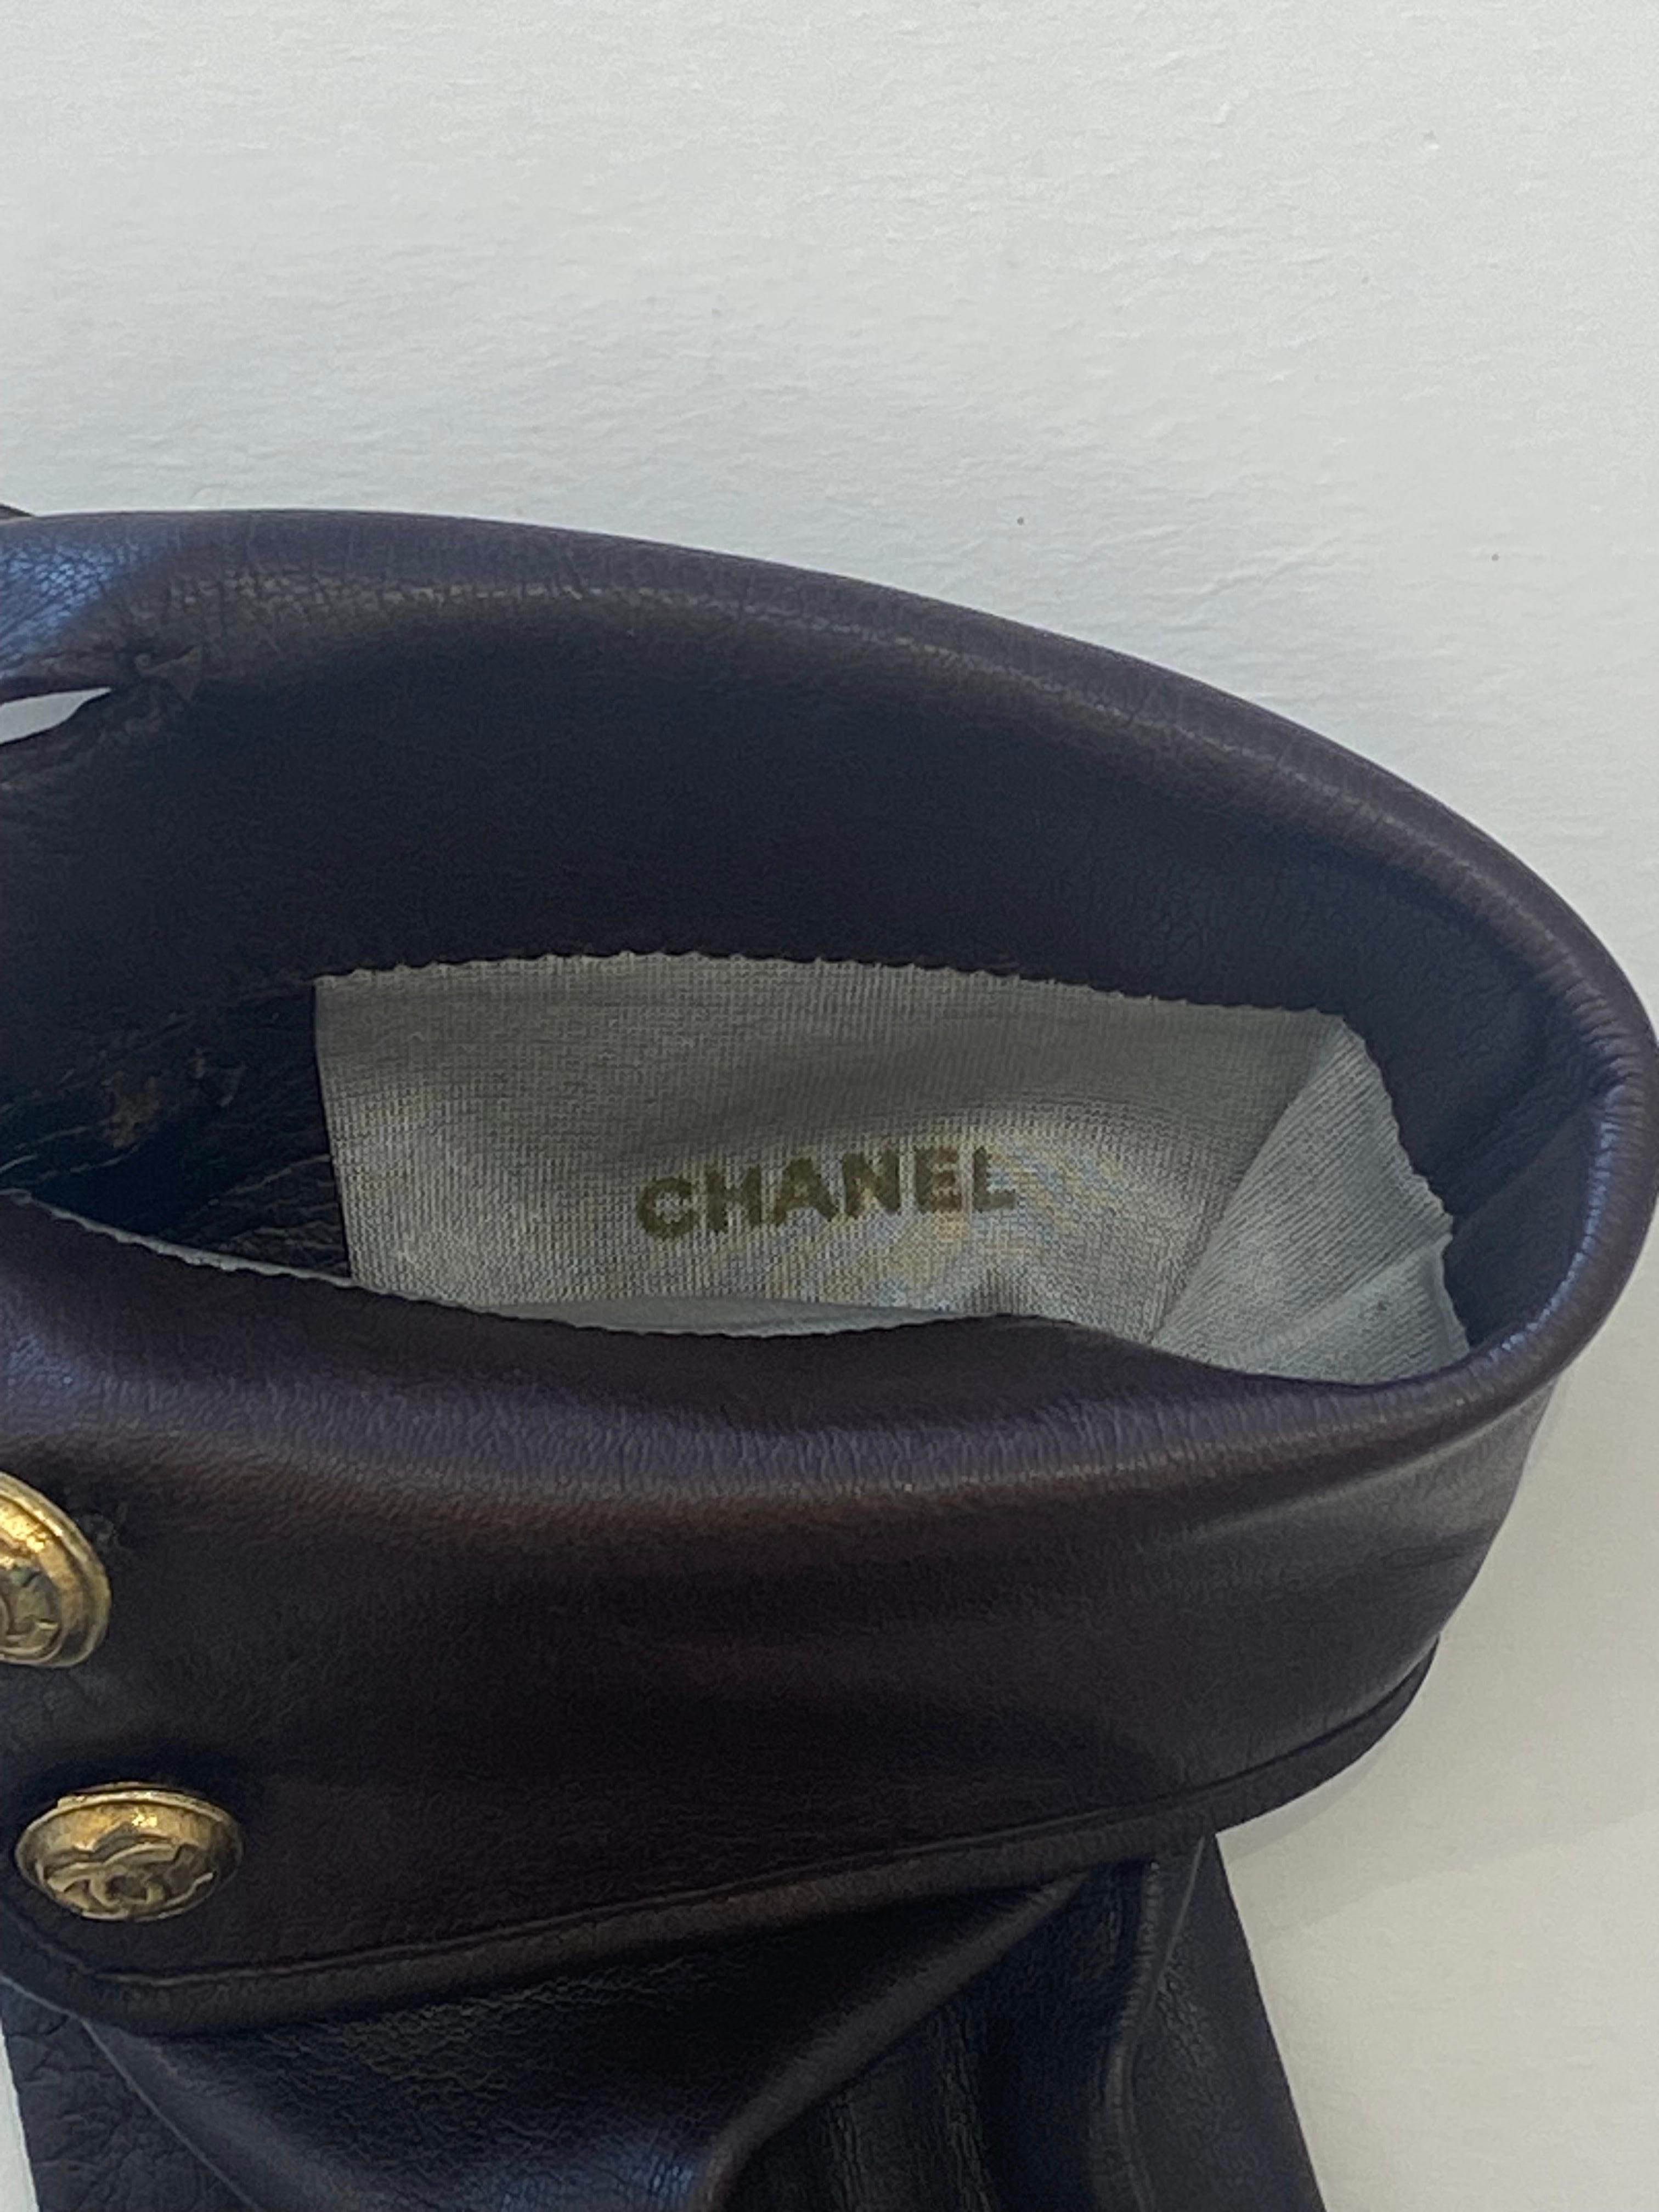 Chanel Buttery Soft Chocolate Brown Lamb Leather 8 Button Elbow Length Gloves 7 1